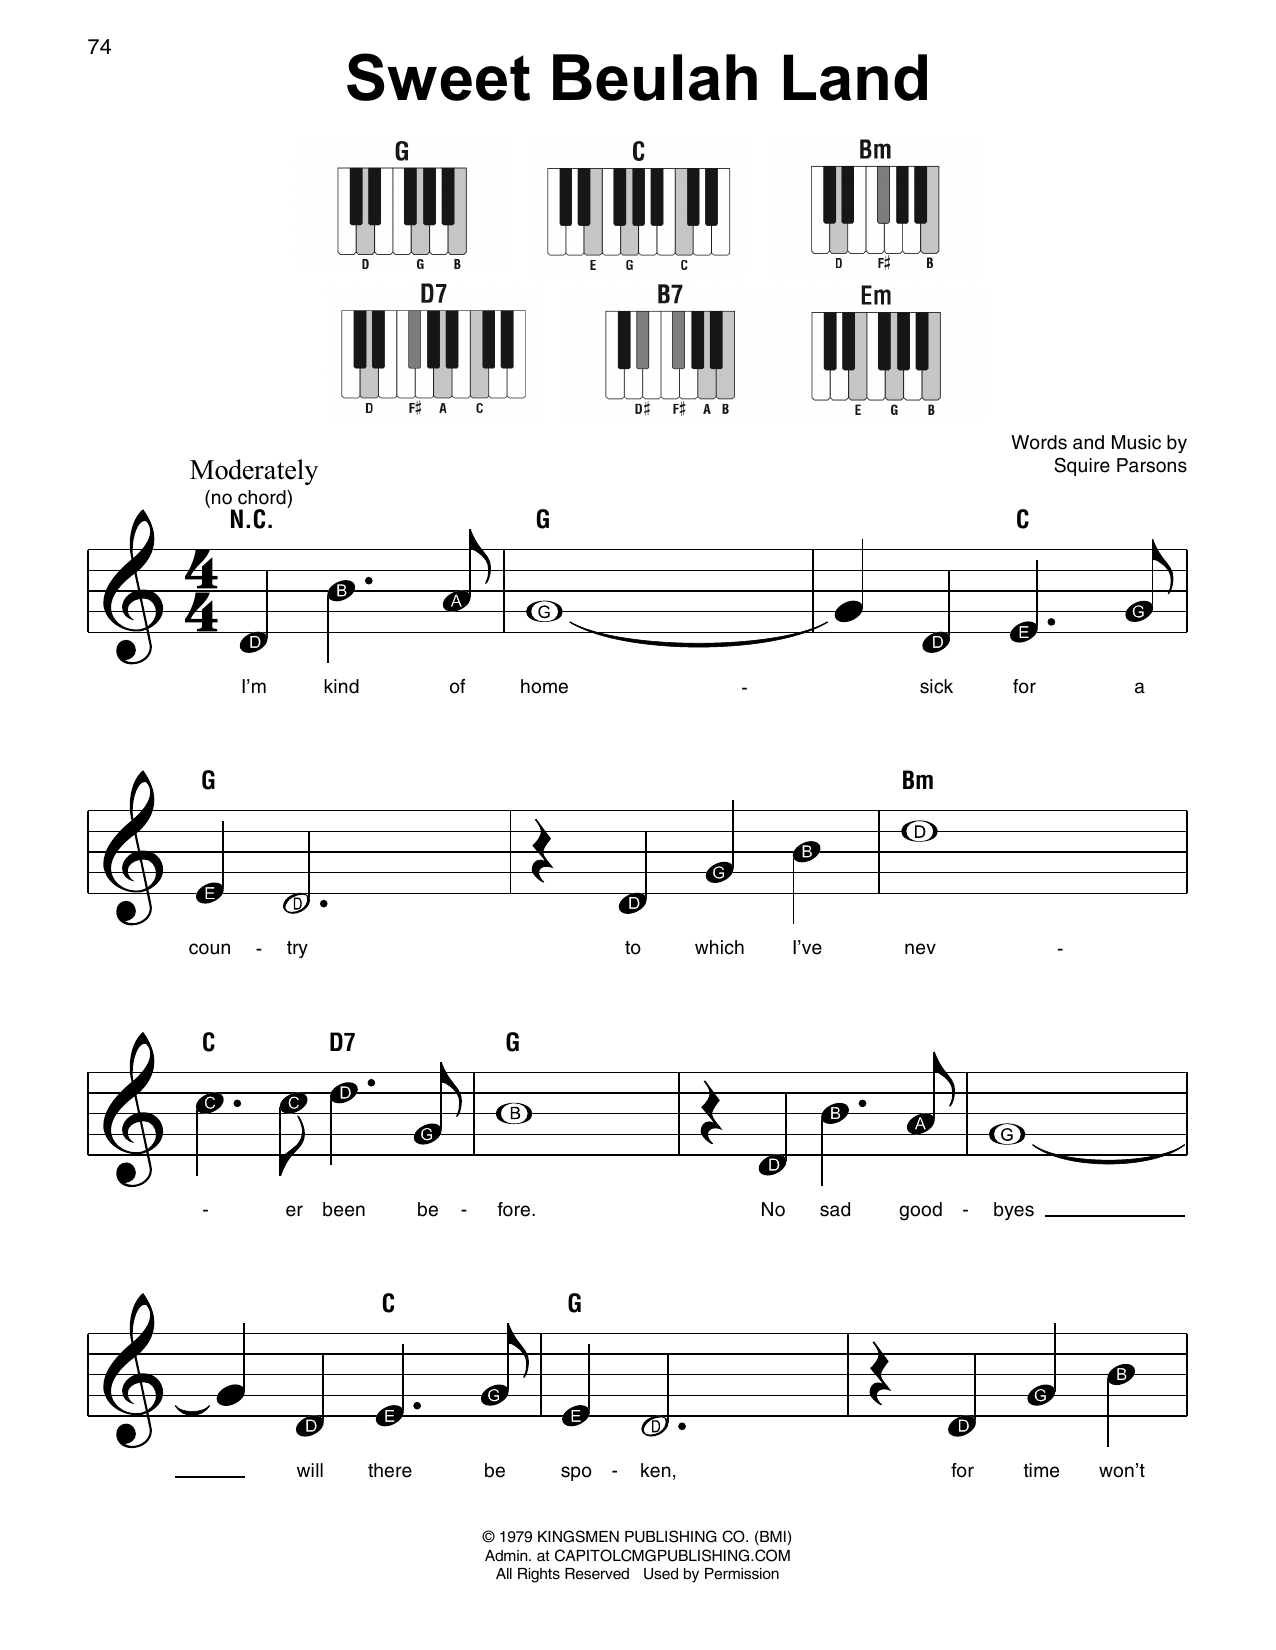 Download Squire Parsons Sweet Beulah Land Sheet Music